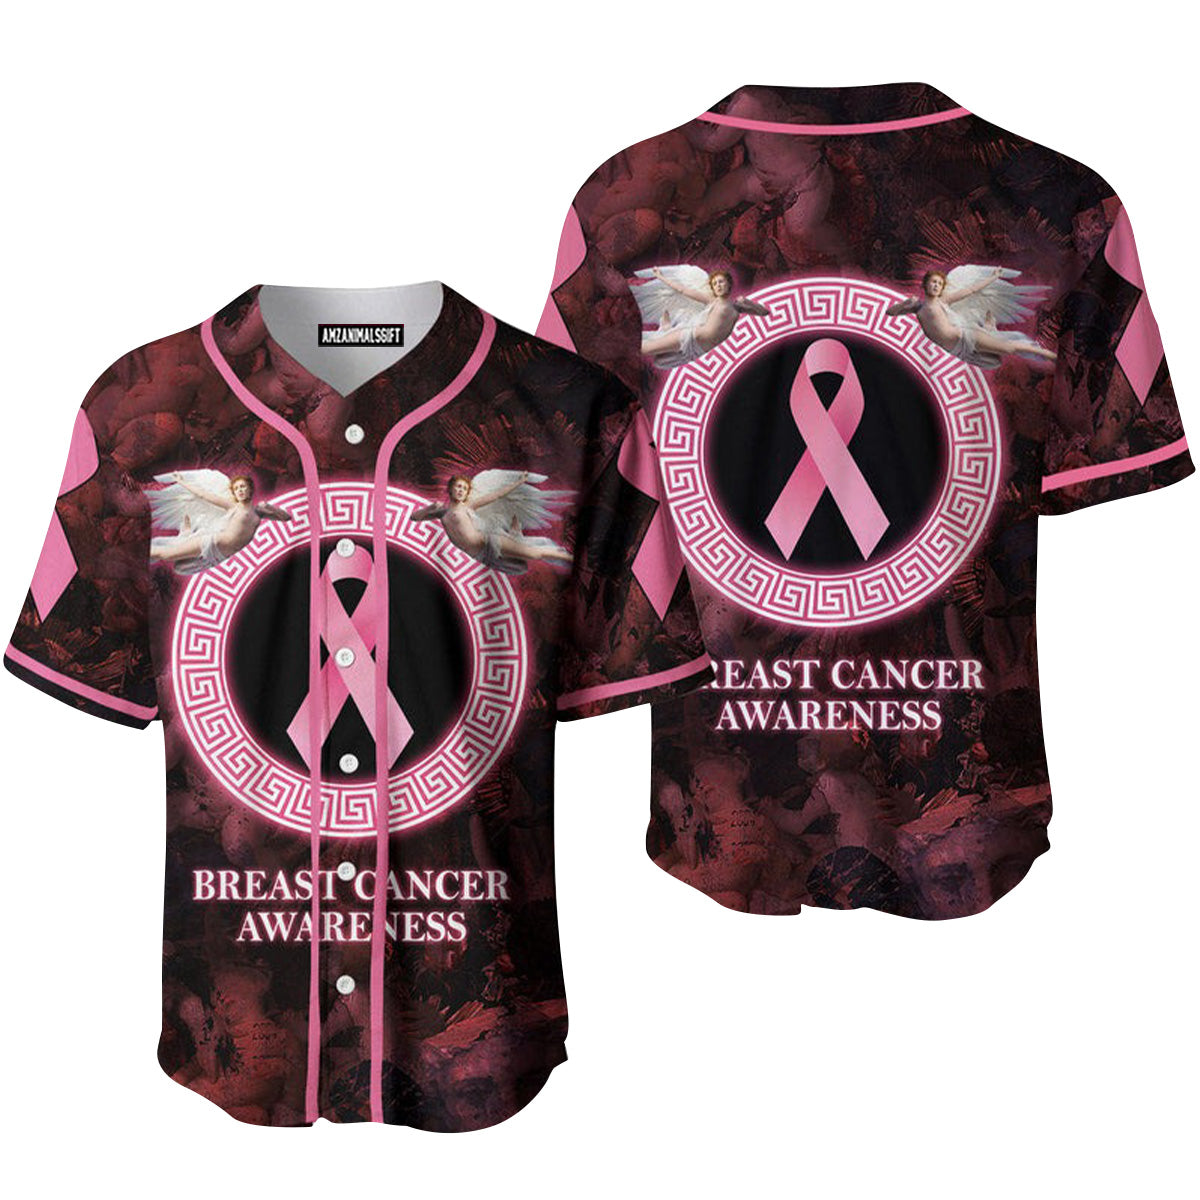 Breast Cancer Awareness Angels Baseball Jersey, Perfect Outfit For Men And Women On Breast Cancer Survivors Baseball Team Baseball Fans